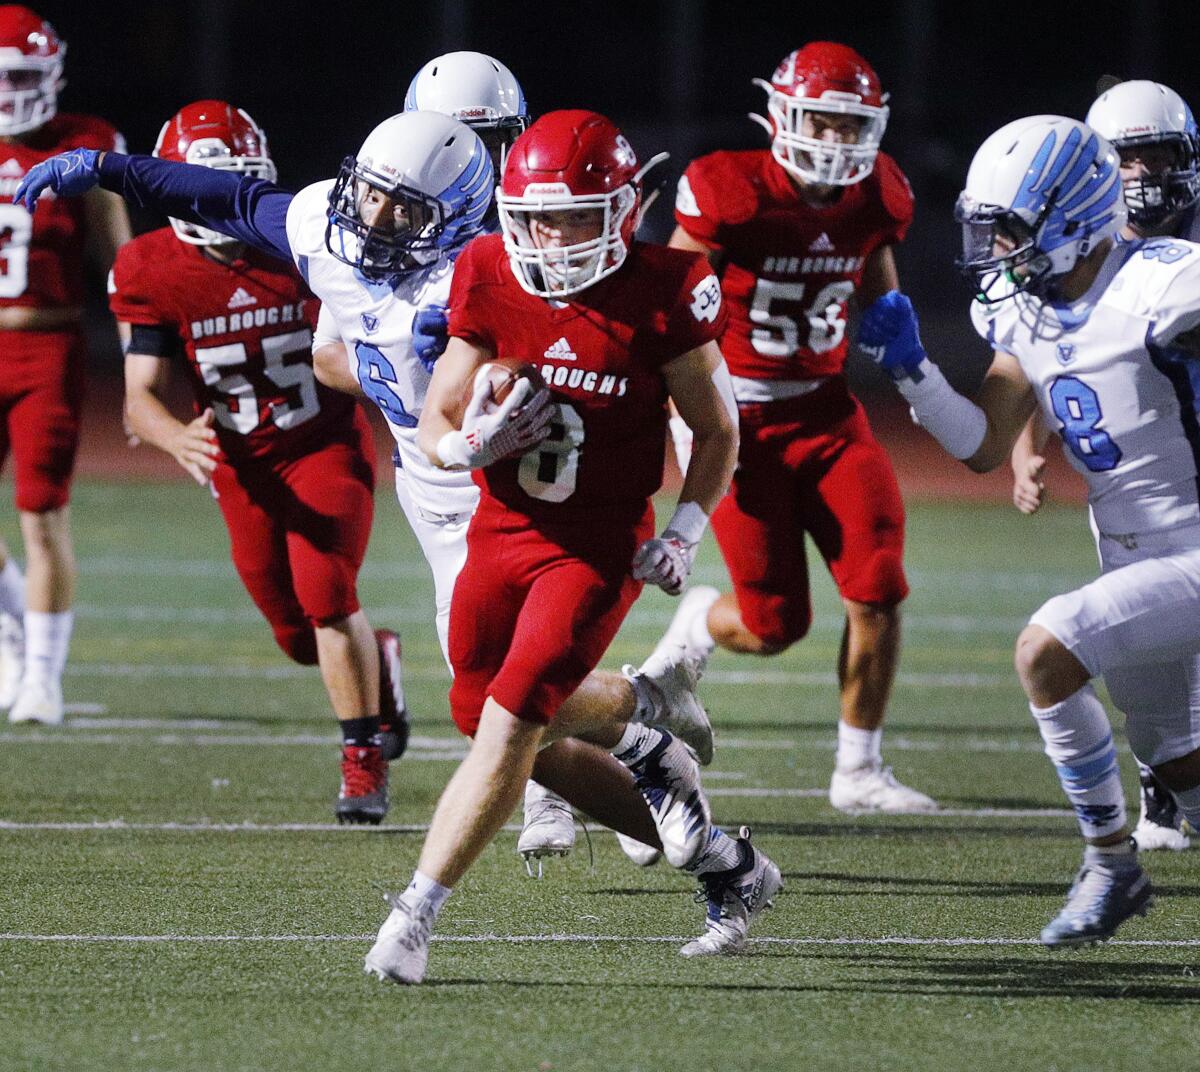 Jon English and the Burroughs High football team will take on Muir in a Pacific League game Friday..